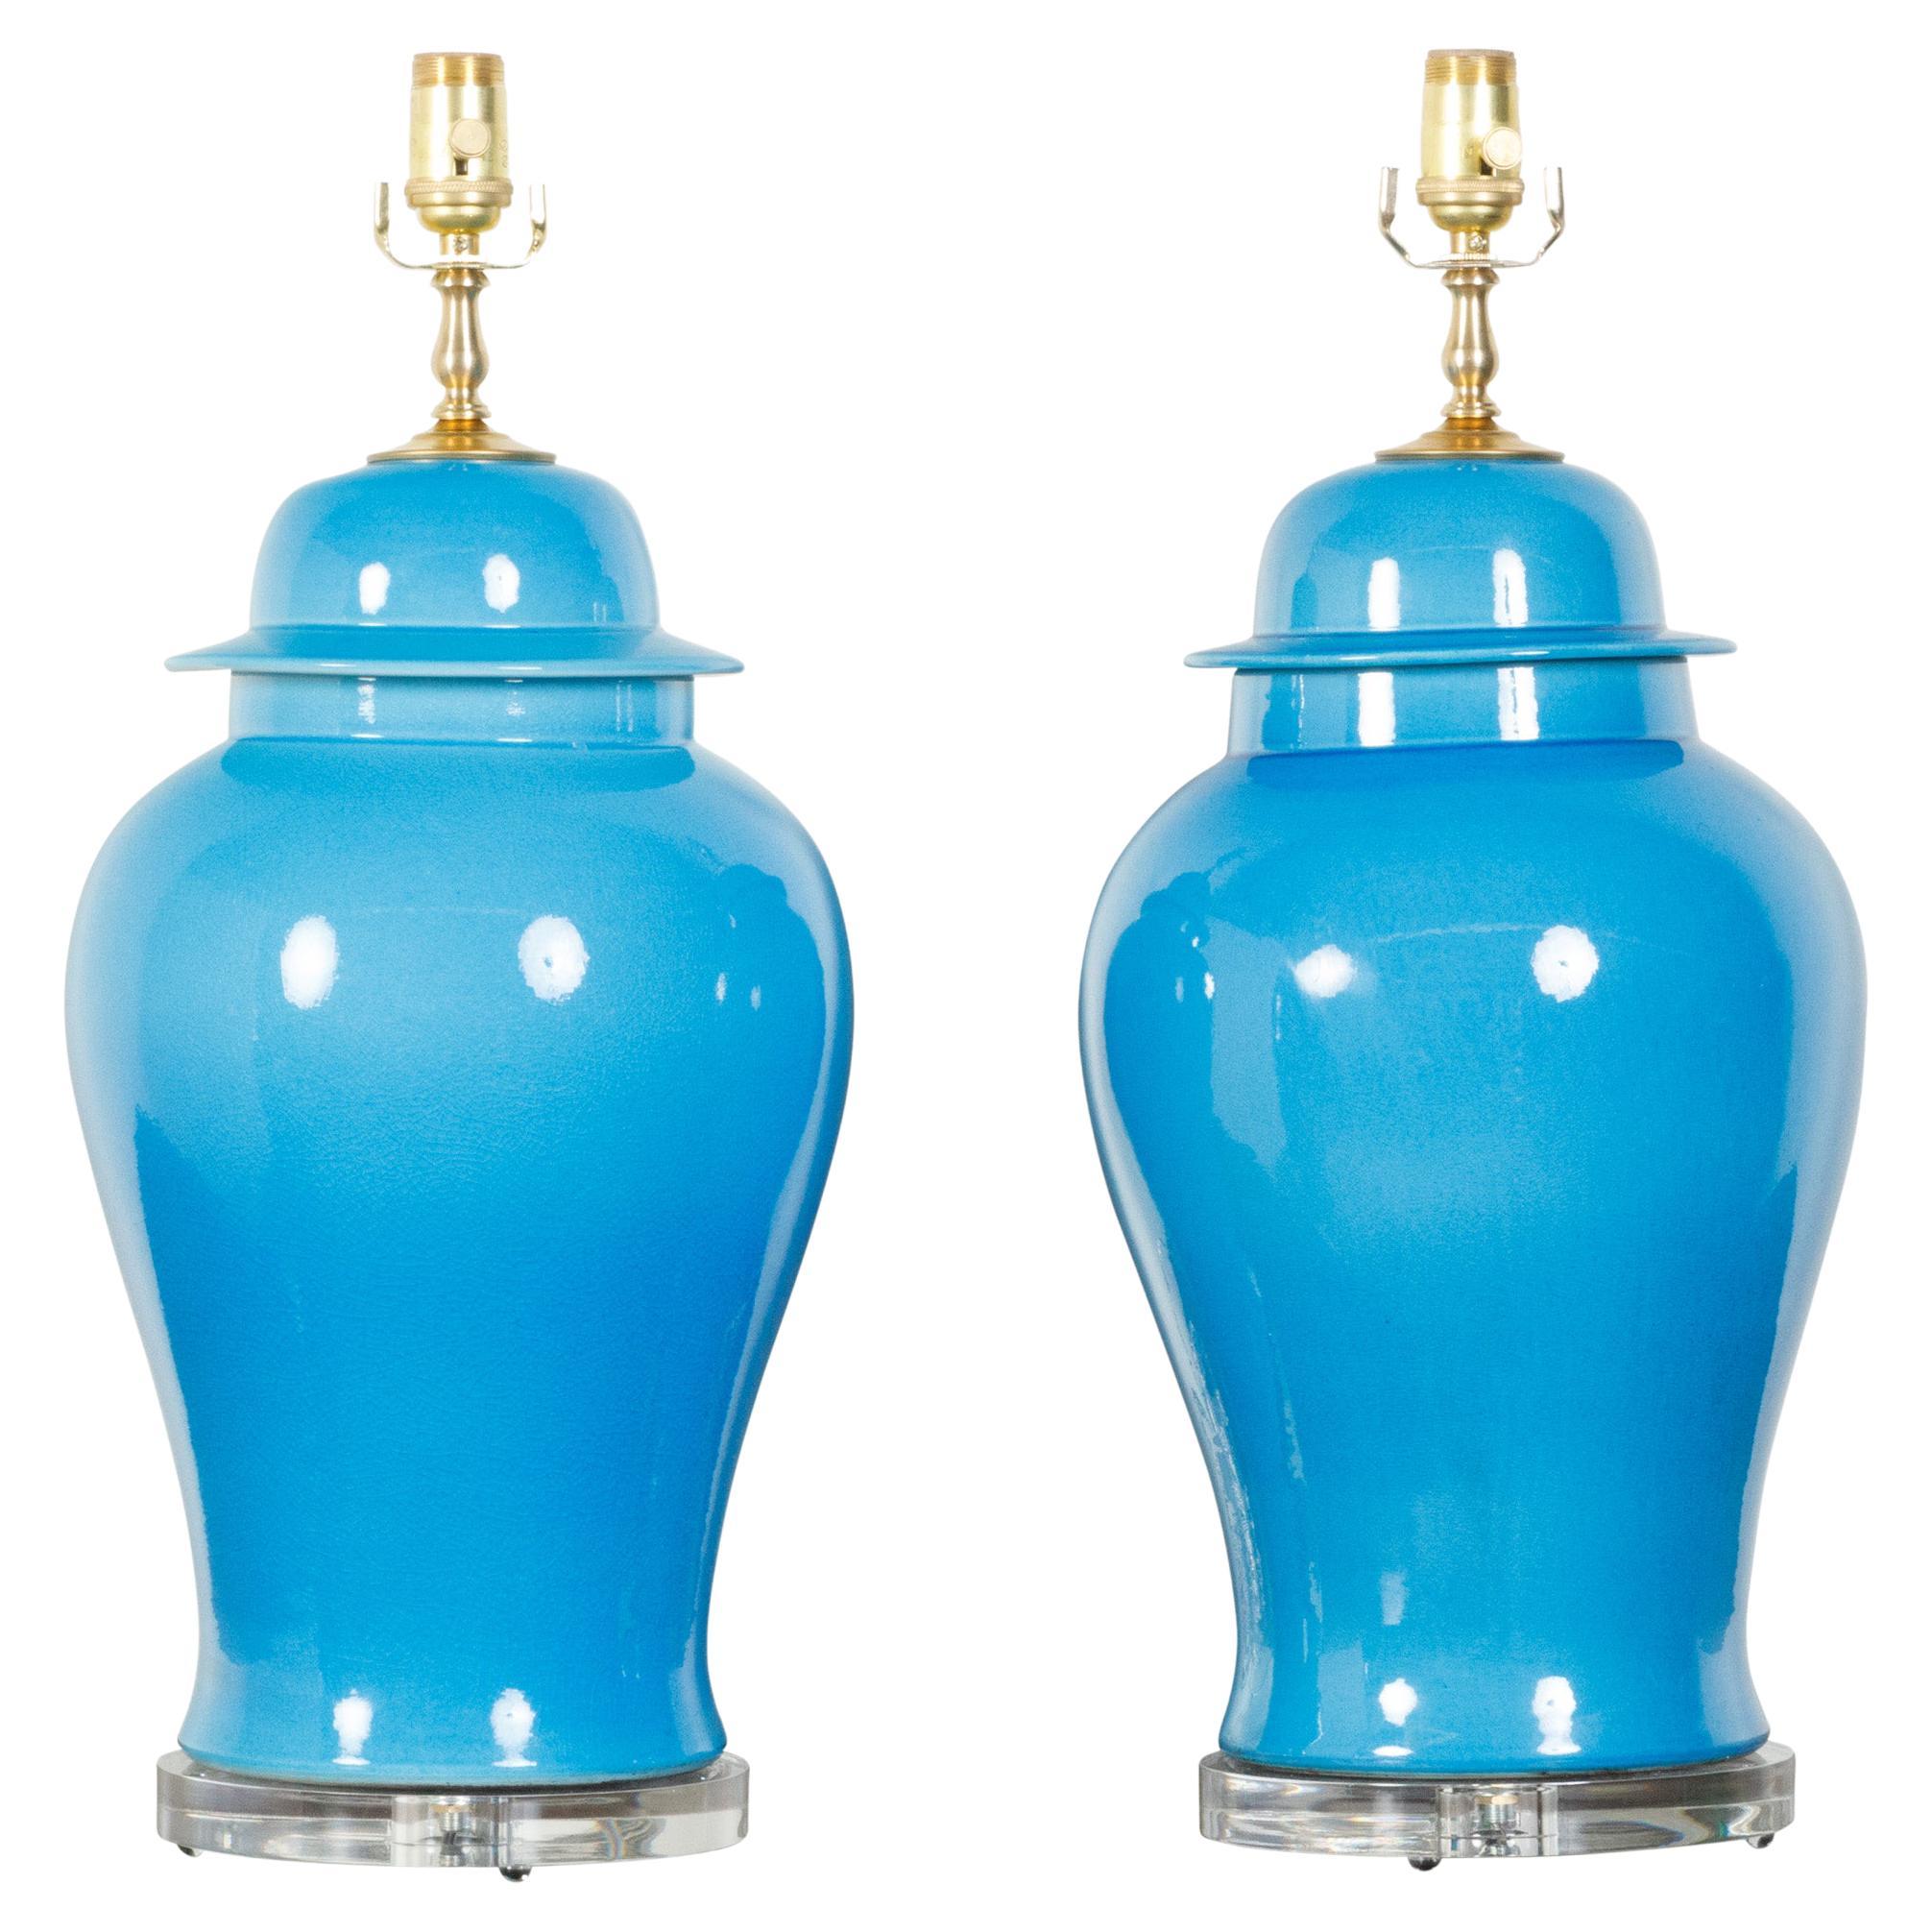 Pair of Mid-Century Blue Porcelain Table Lamps Made of Vases on Lucite Bases